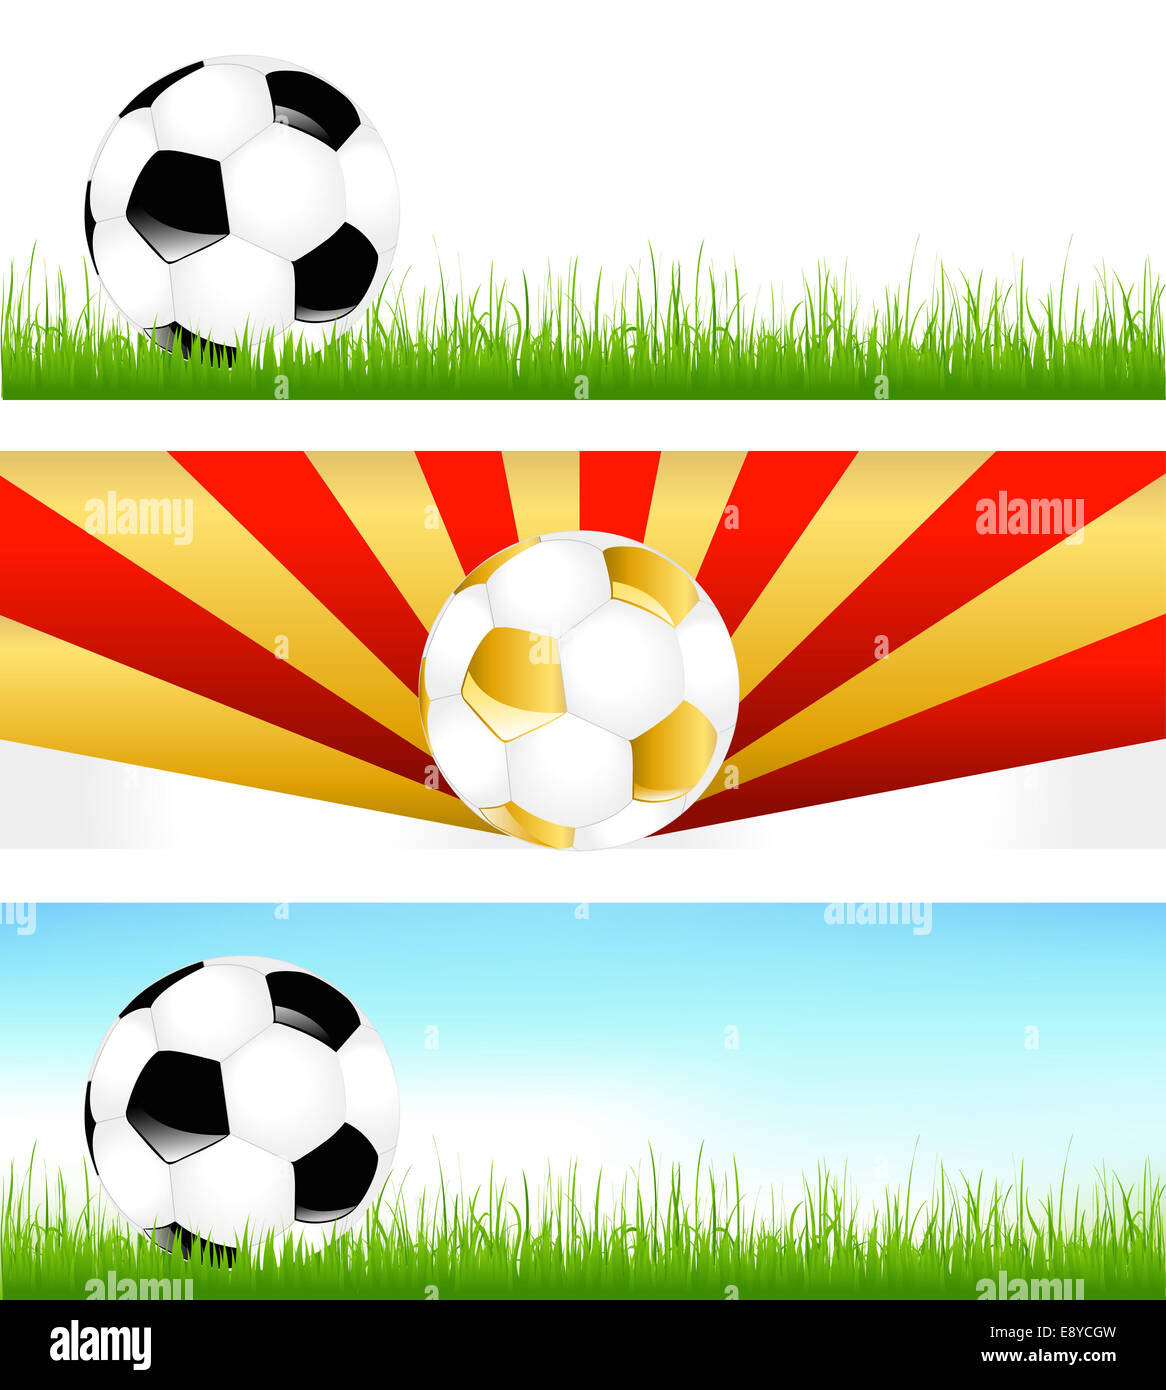 Banners With Soccer Balls Stock Photo